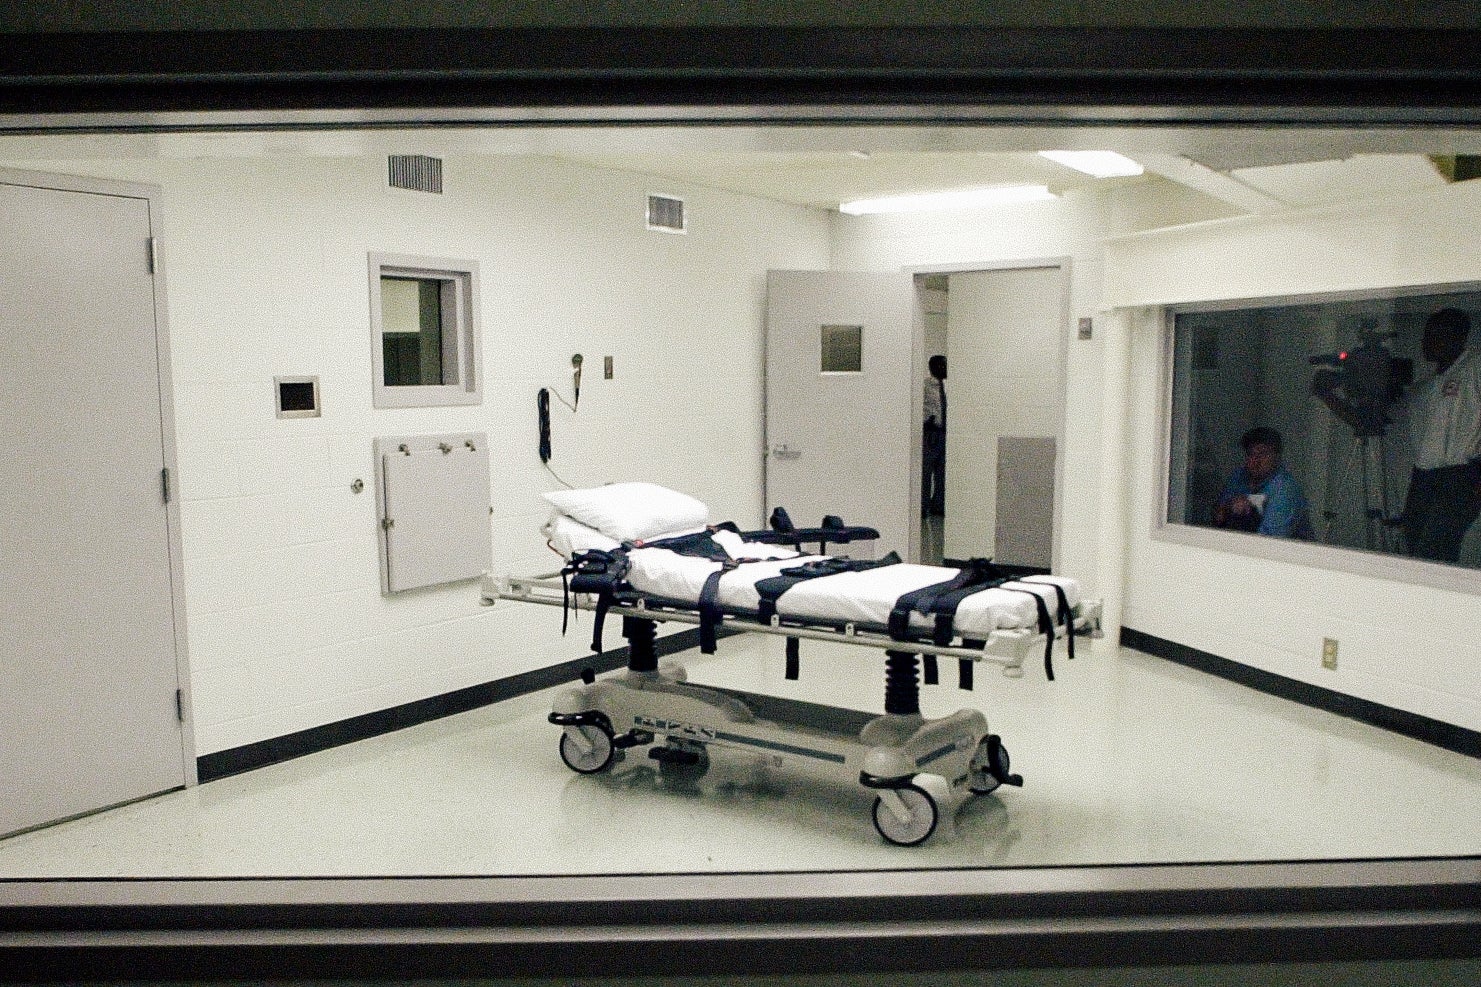 Alabama's lethal injection chamber at Holman Correctional Facility in Atmore, Ala., is pictured in this Oct. 7, 2002 file photo.